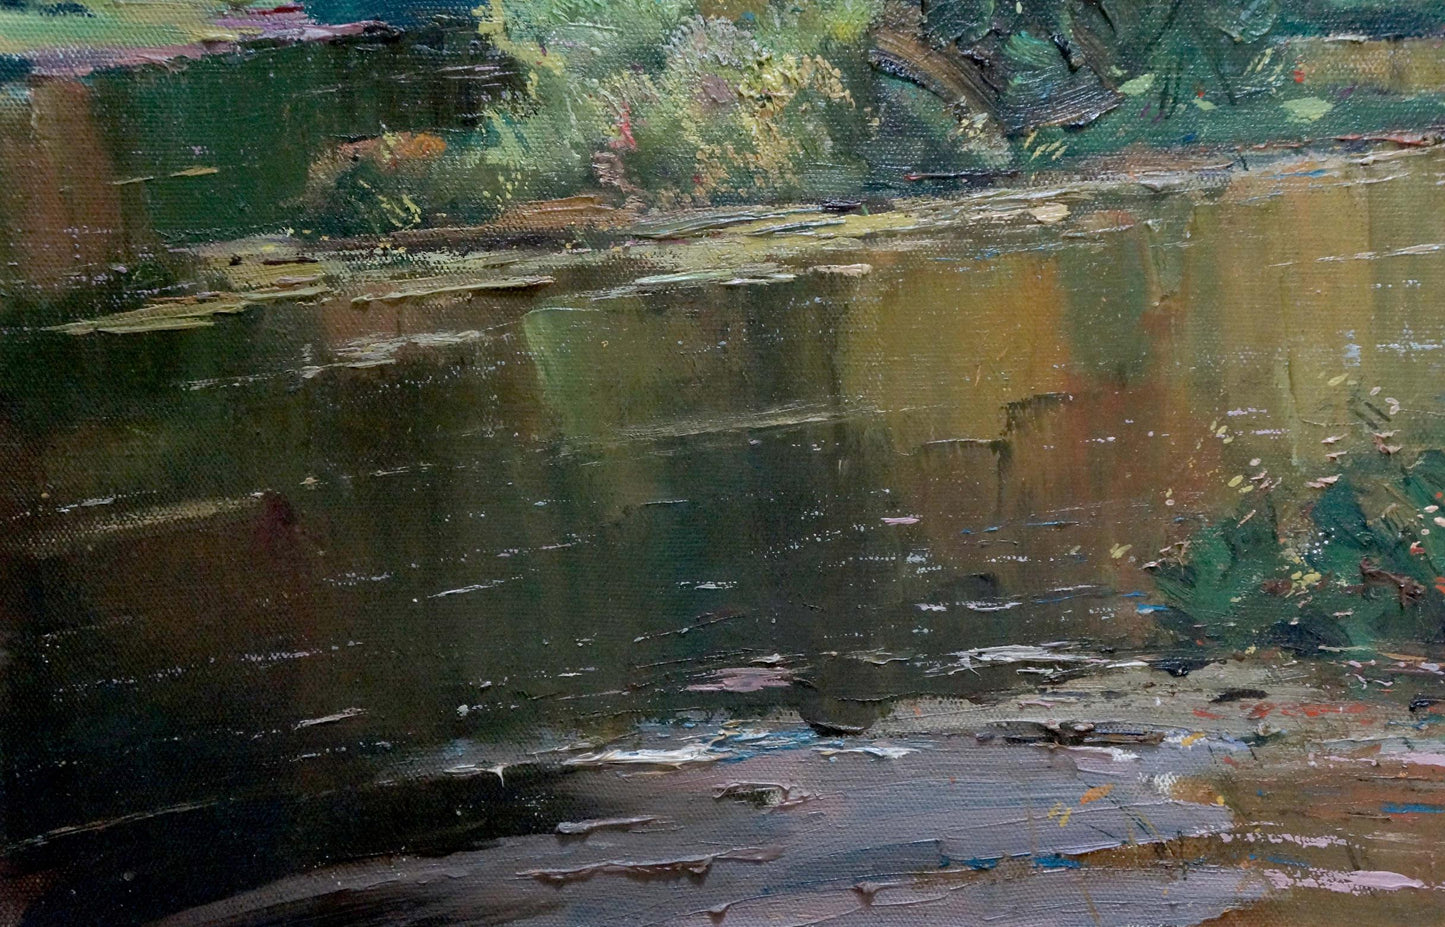 Oil painting Down the river